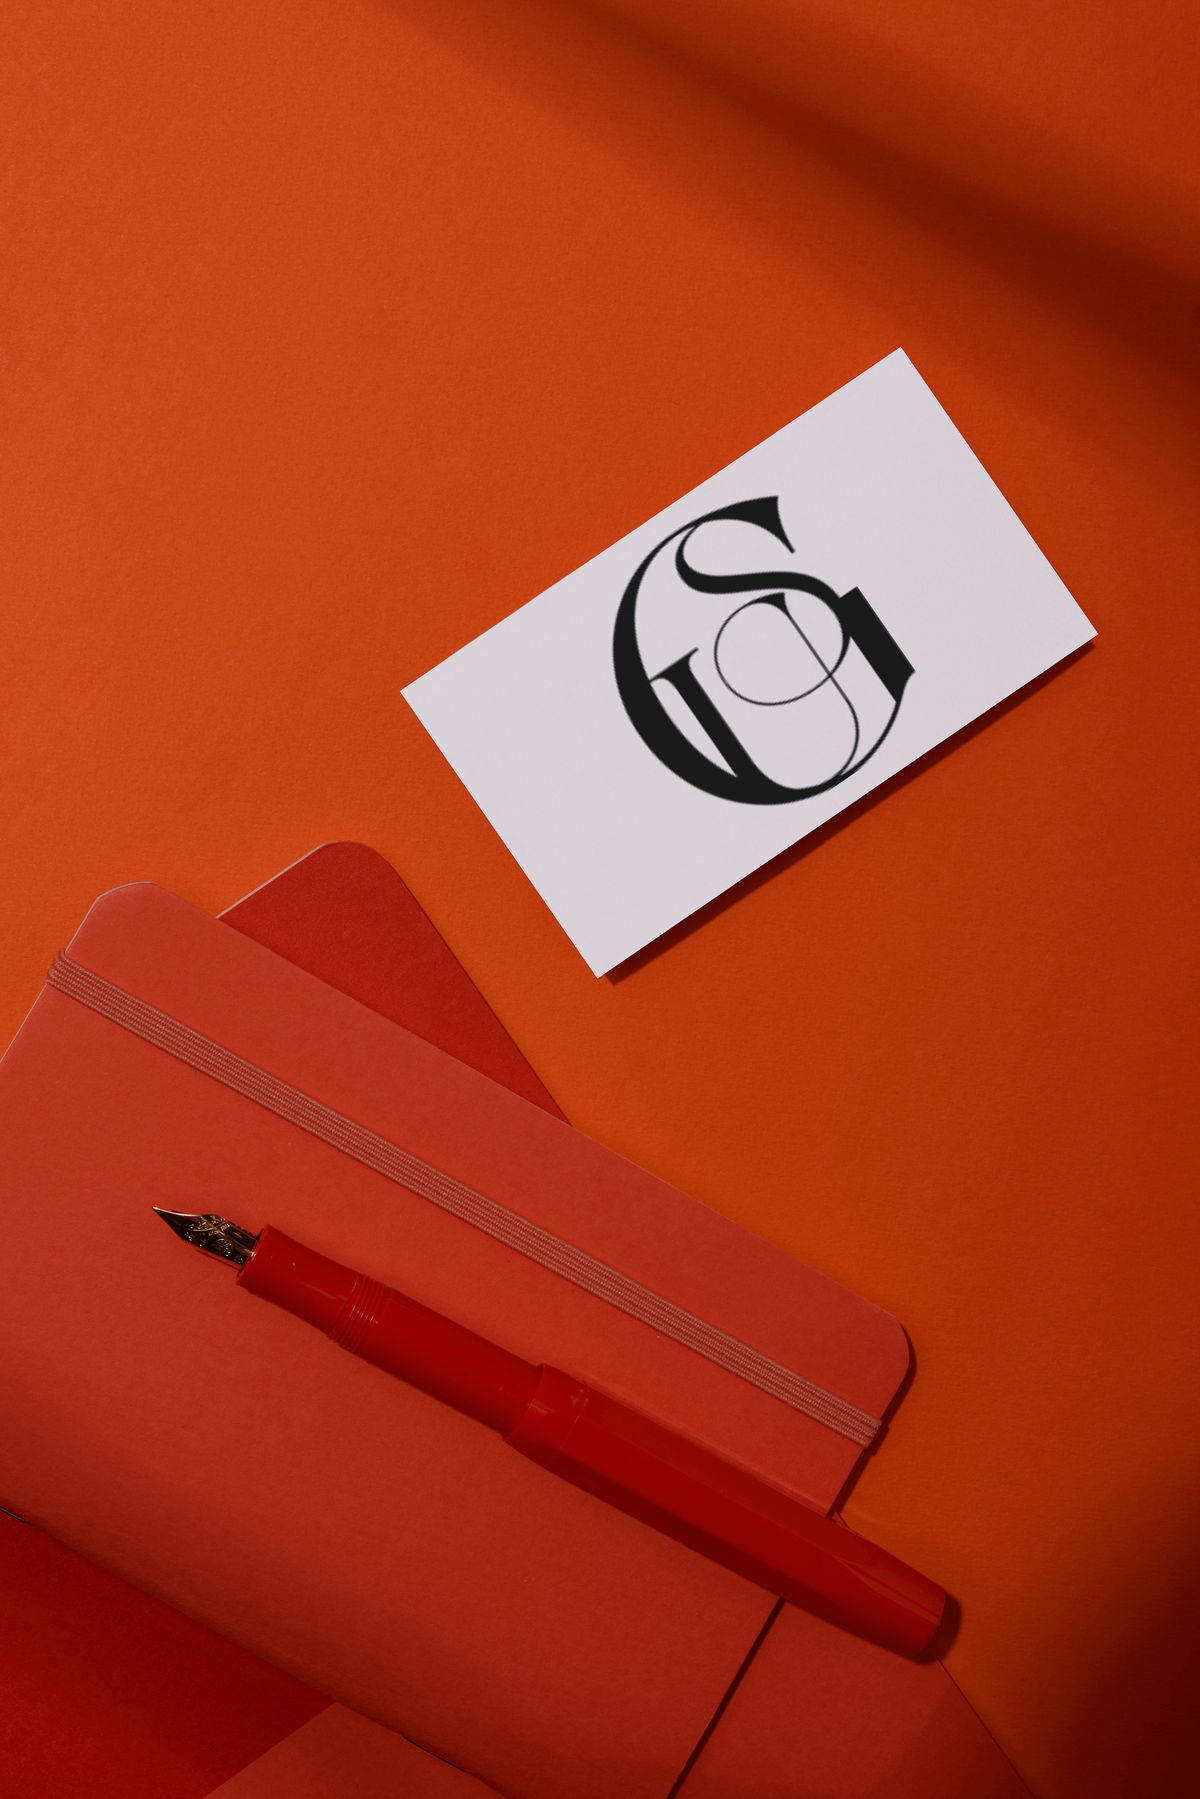 GSU submark logo on  a business card on a red background stationary set